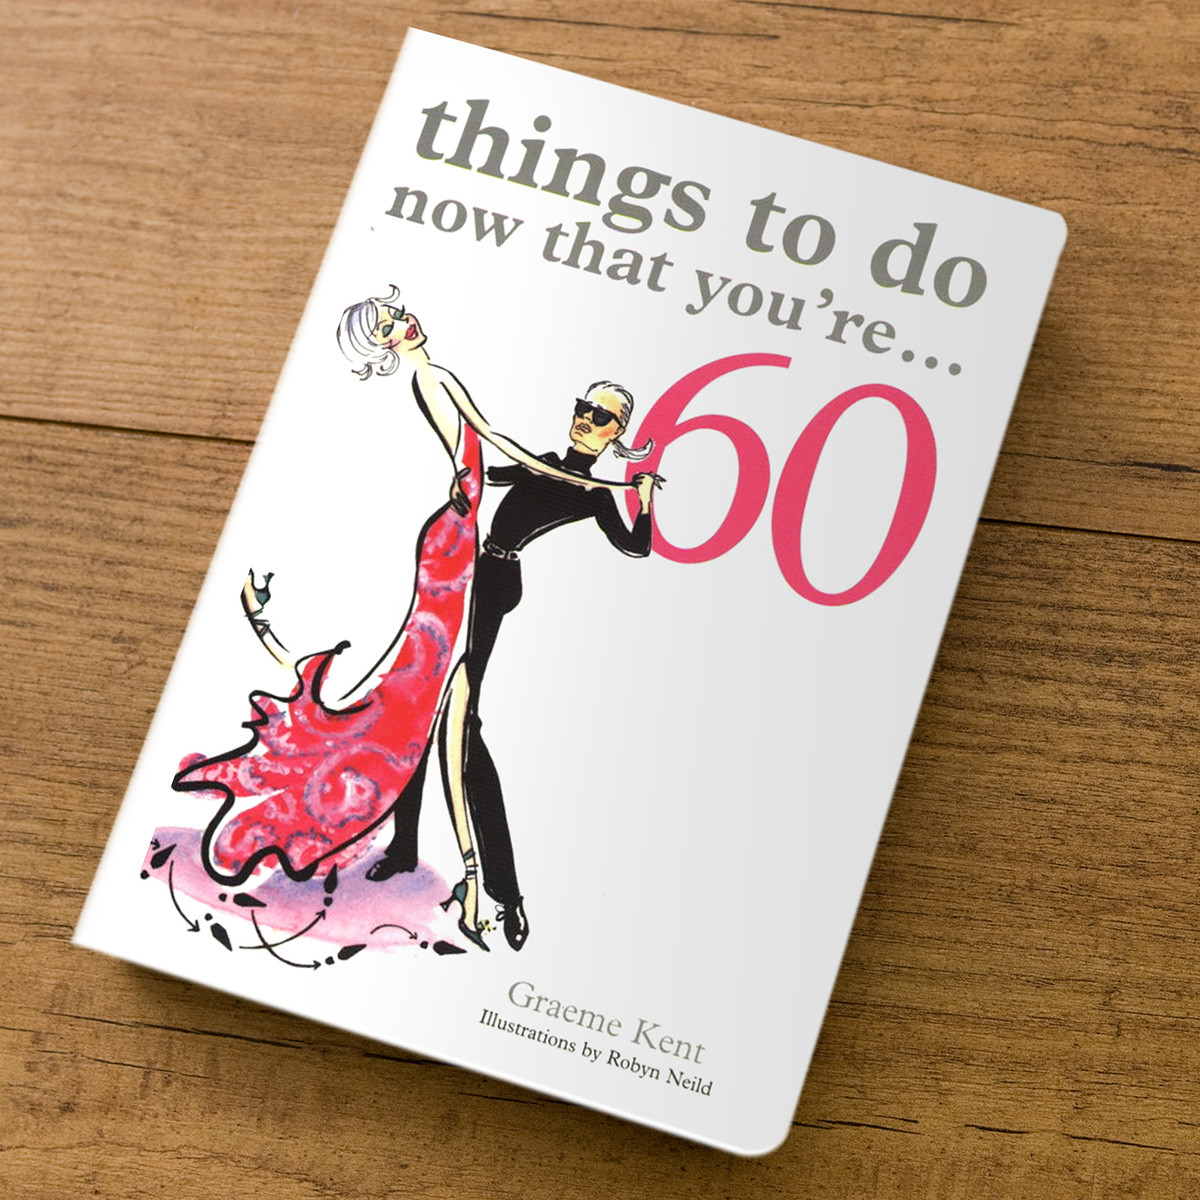 60Th Birthday Gift Ideas For Women
 Things To Do Now That You re 60 Gift Book 60th